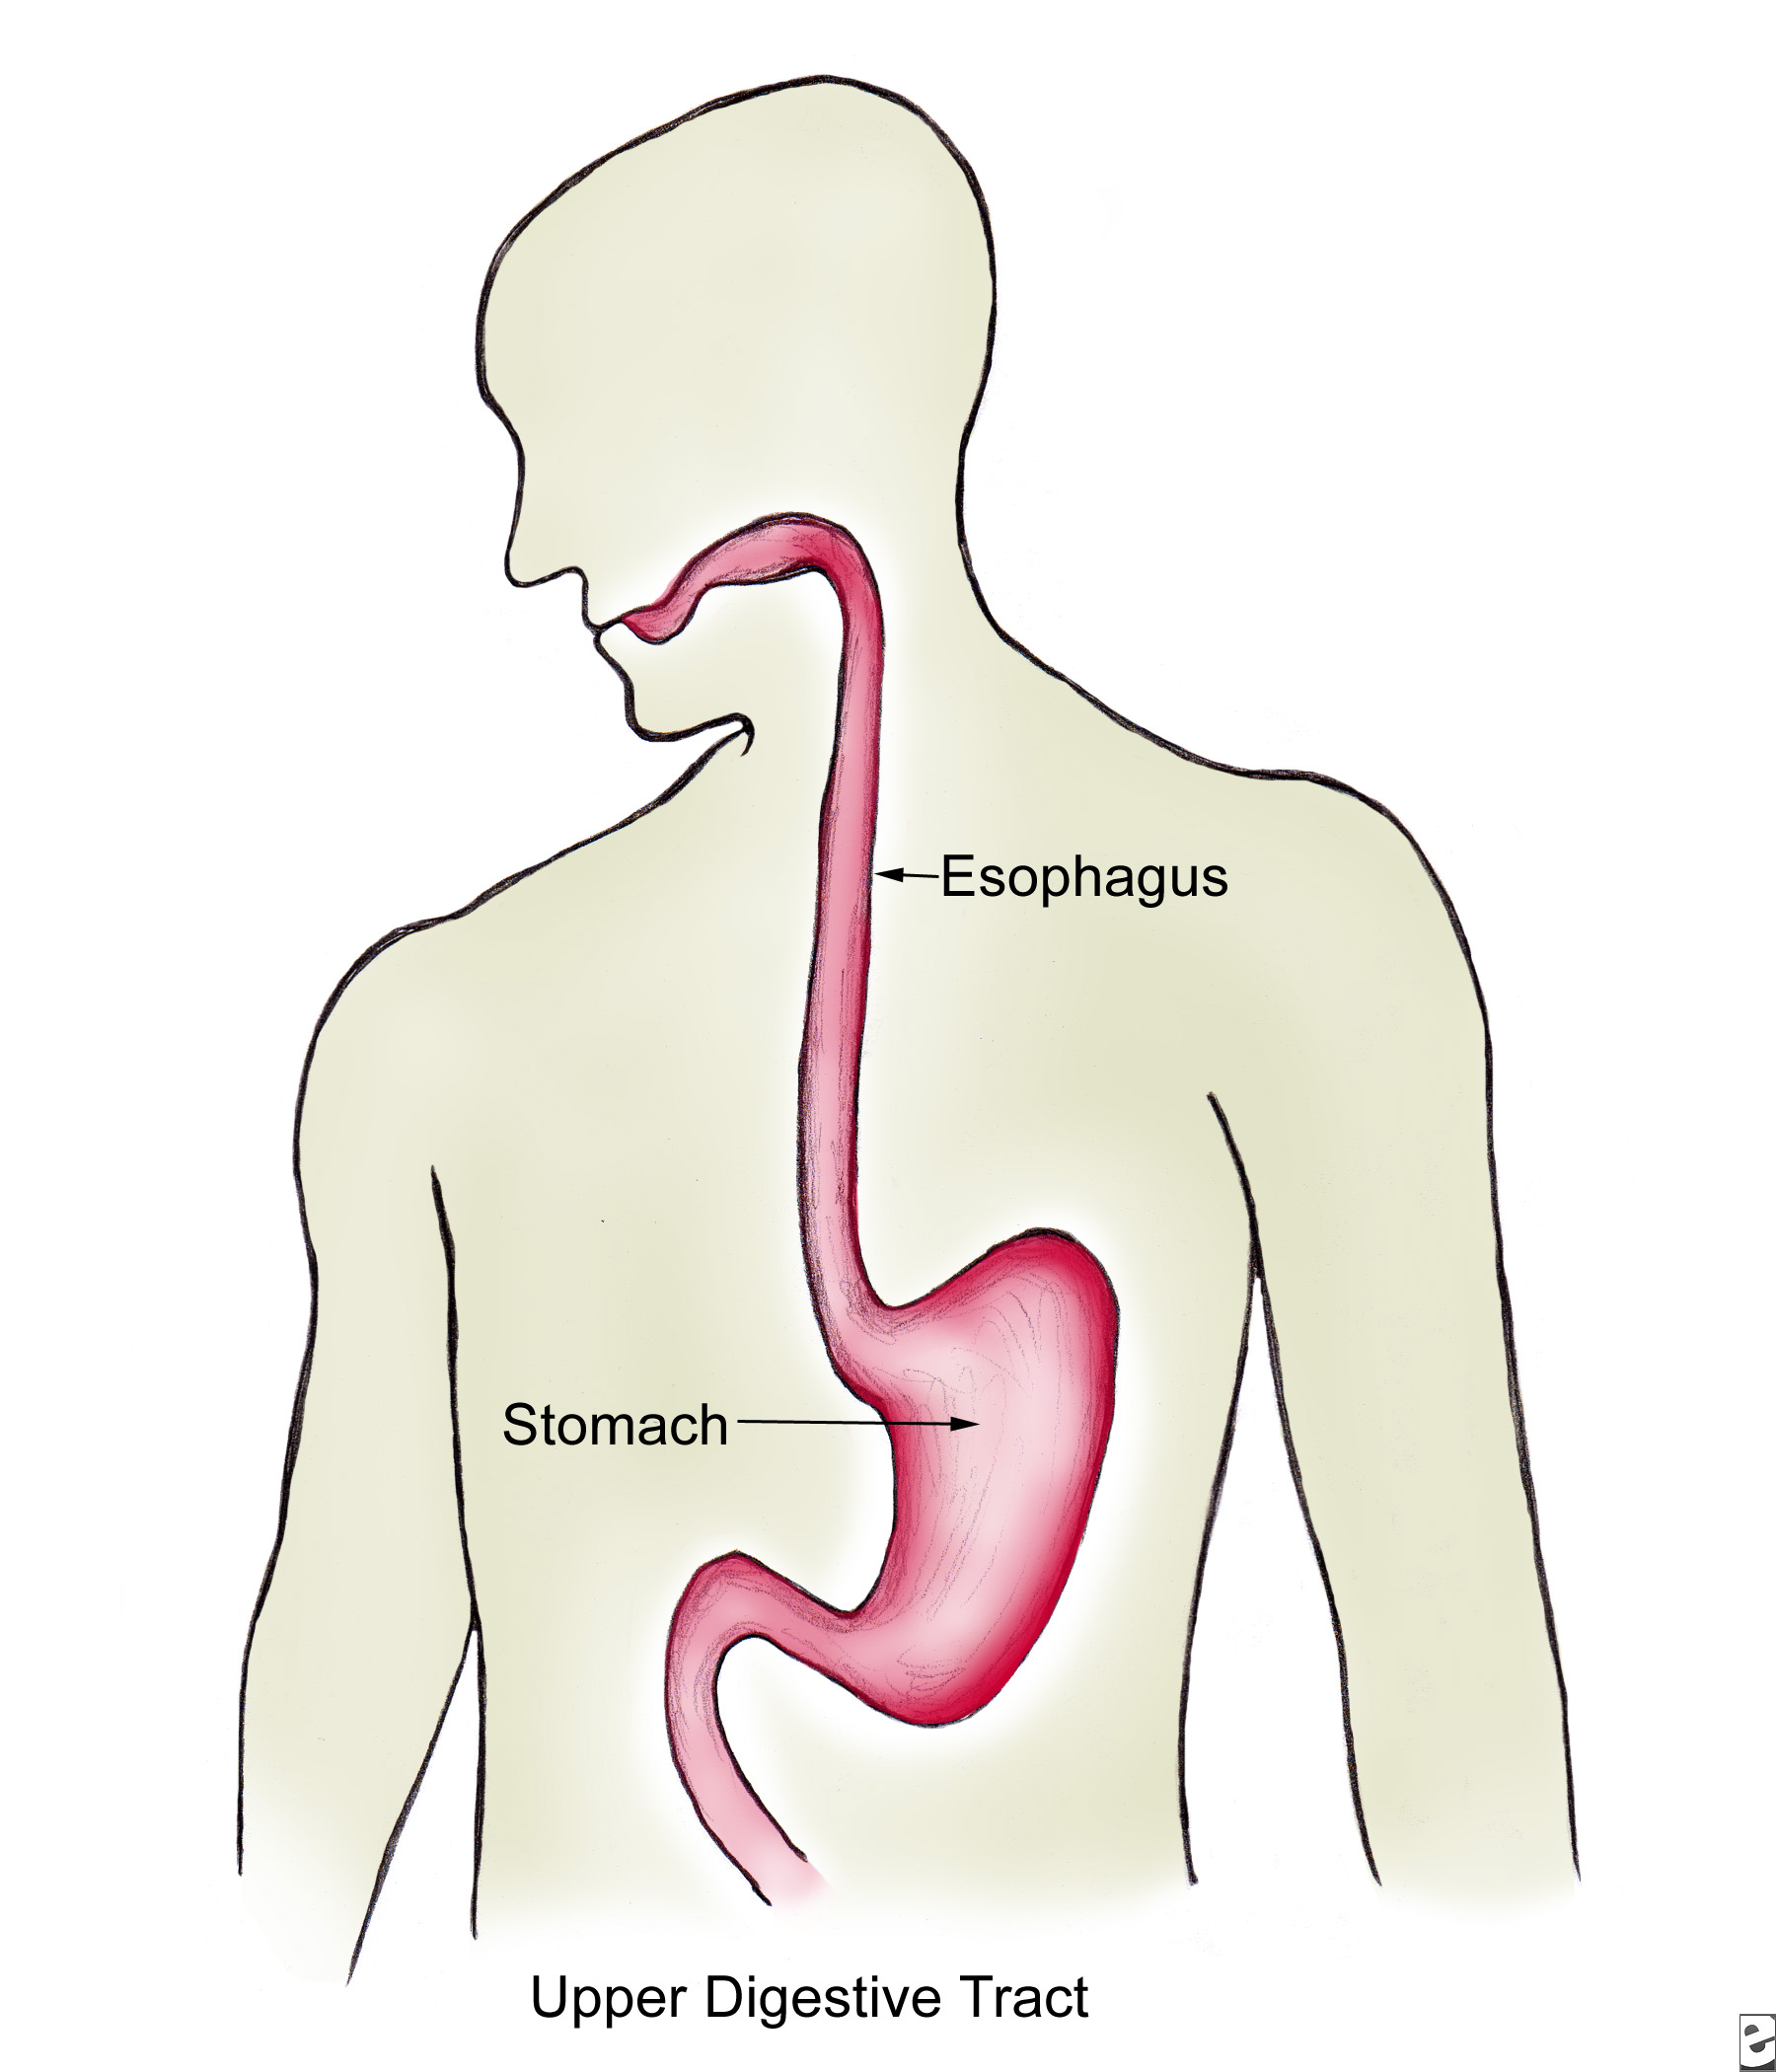 The esophagus Structure of the esophagus